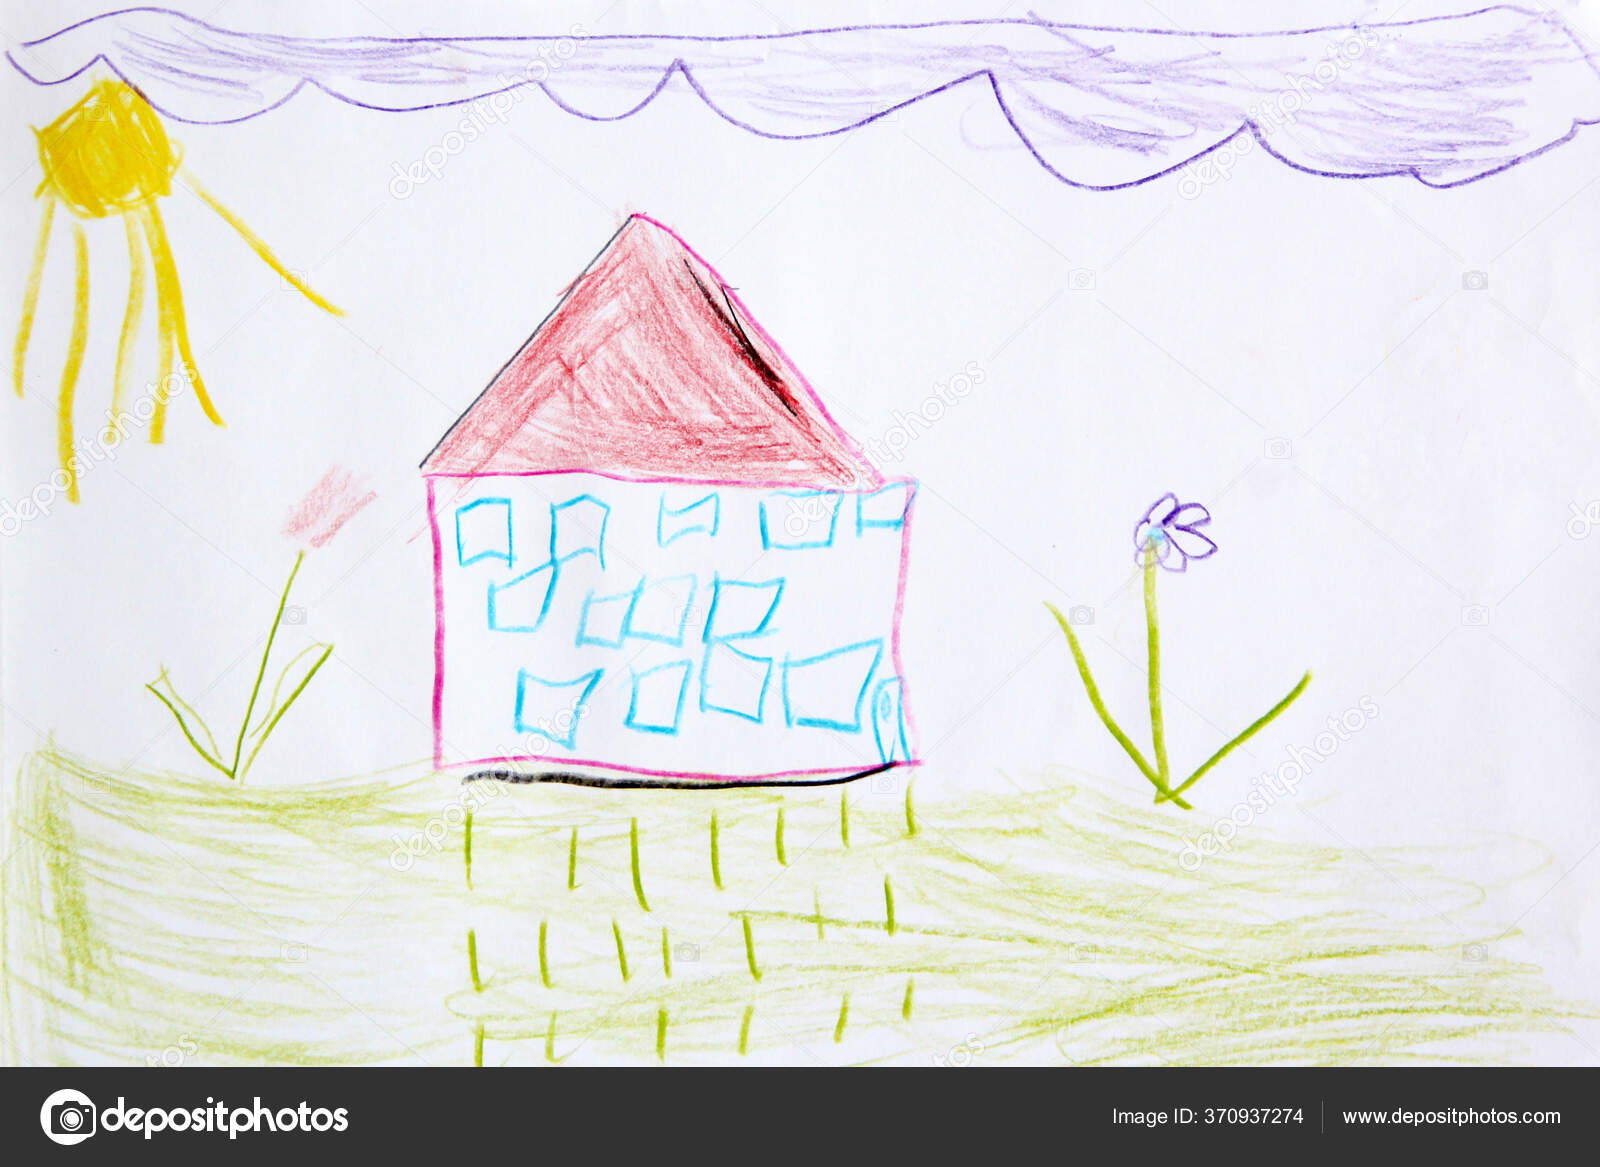 depositphotos 370937274 stock photo children drawing rural house lawn